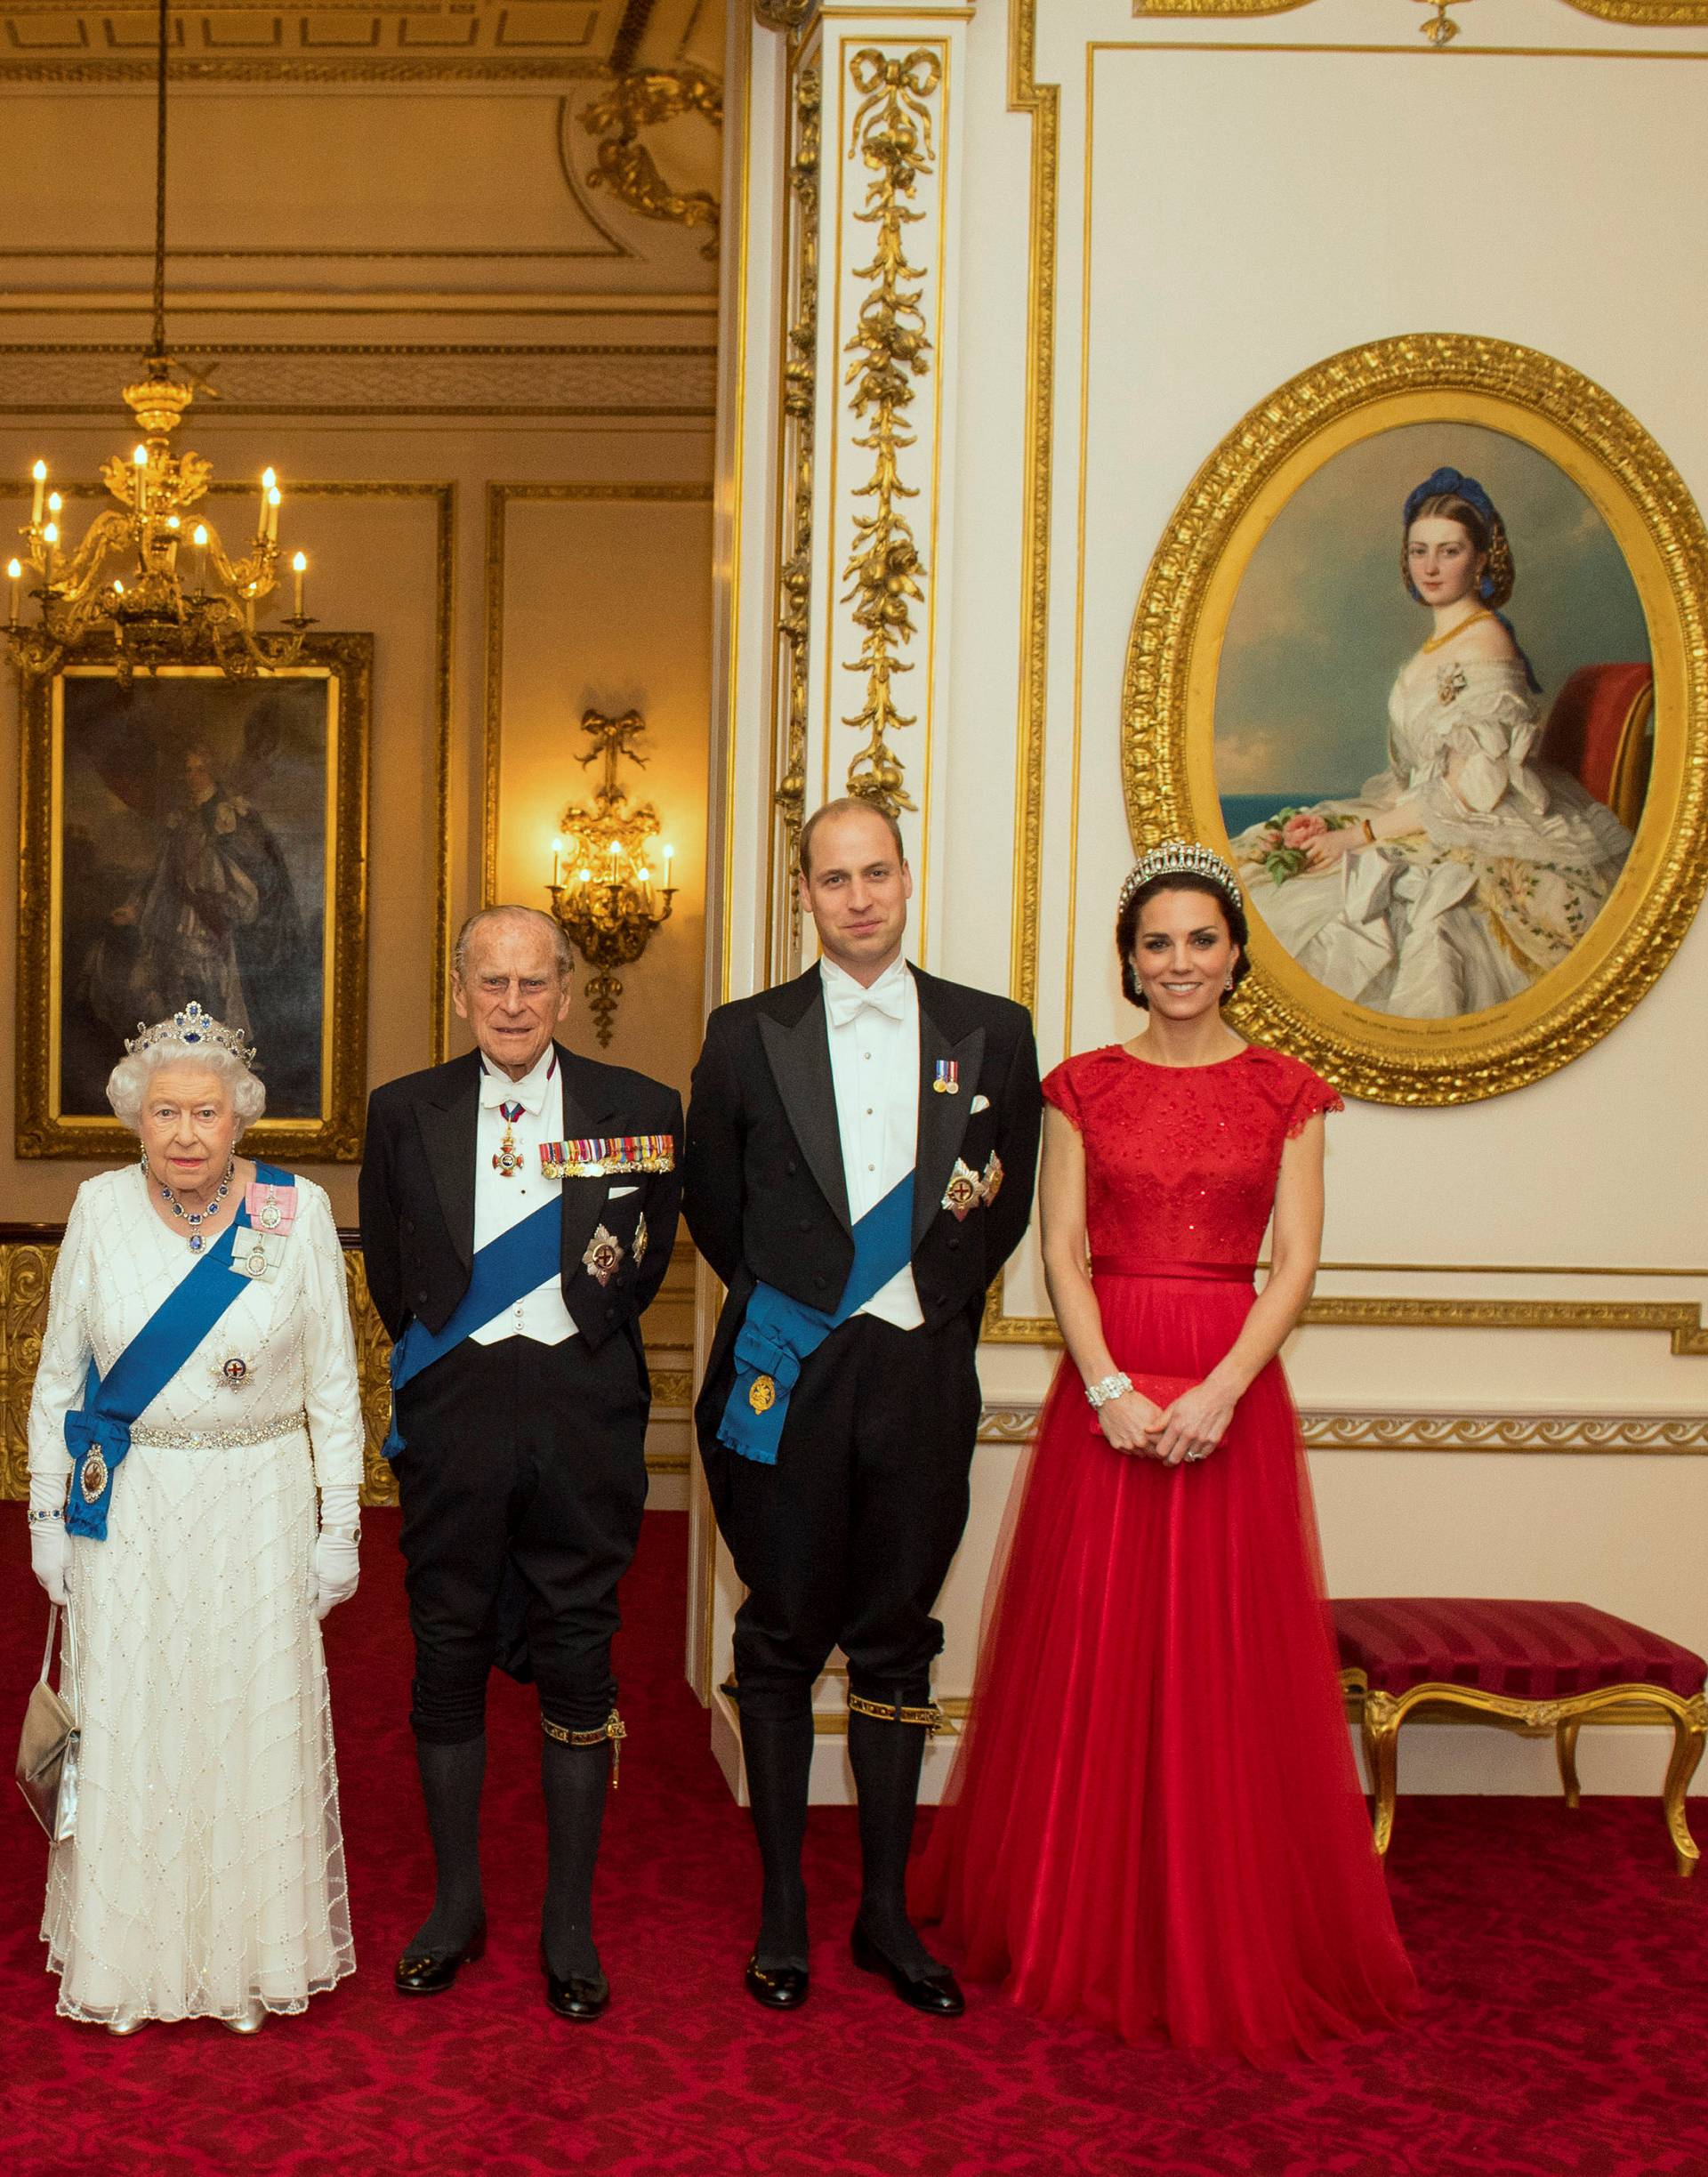 FILE PHOTO - Members of the royal family arrive for the annual evening reception for members of the Diplomatic Corps at Buckingham Palace in London